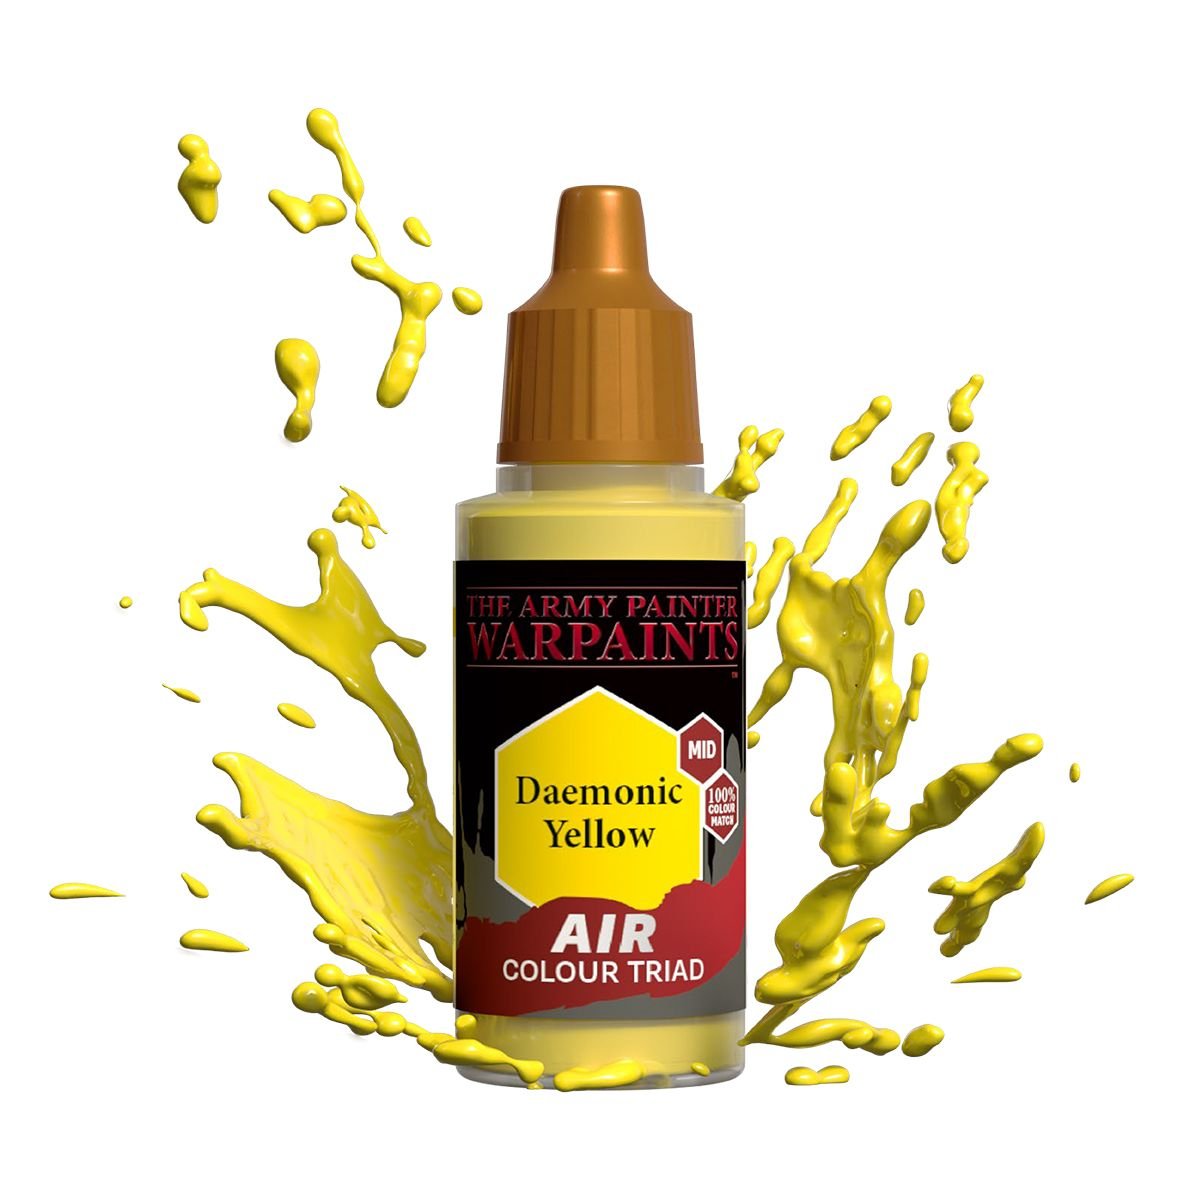 The Army Painter - Warpaints Air: Daemonic Yellow (18ml/0.6oz)